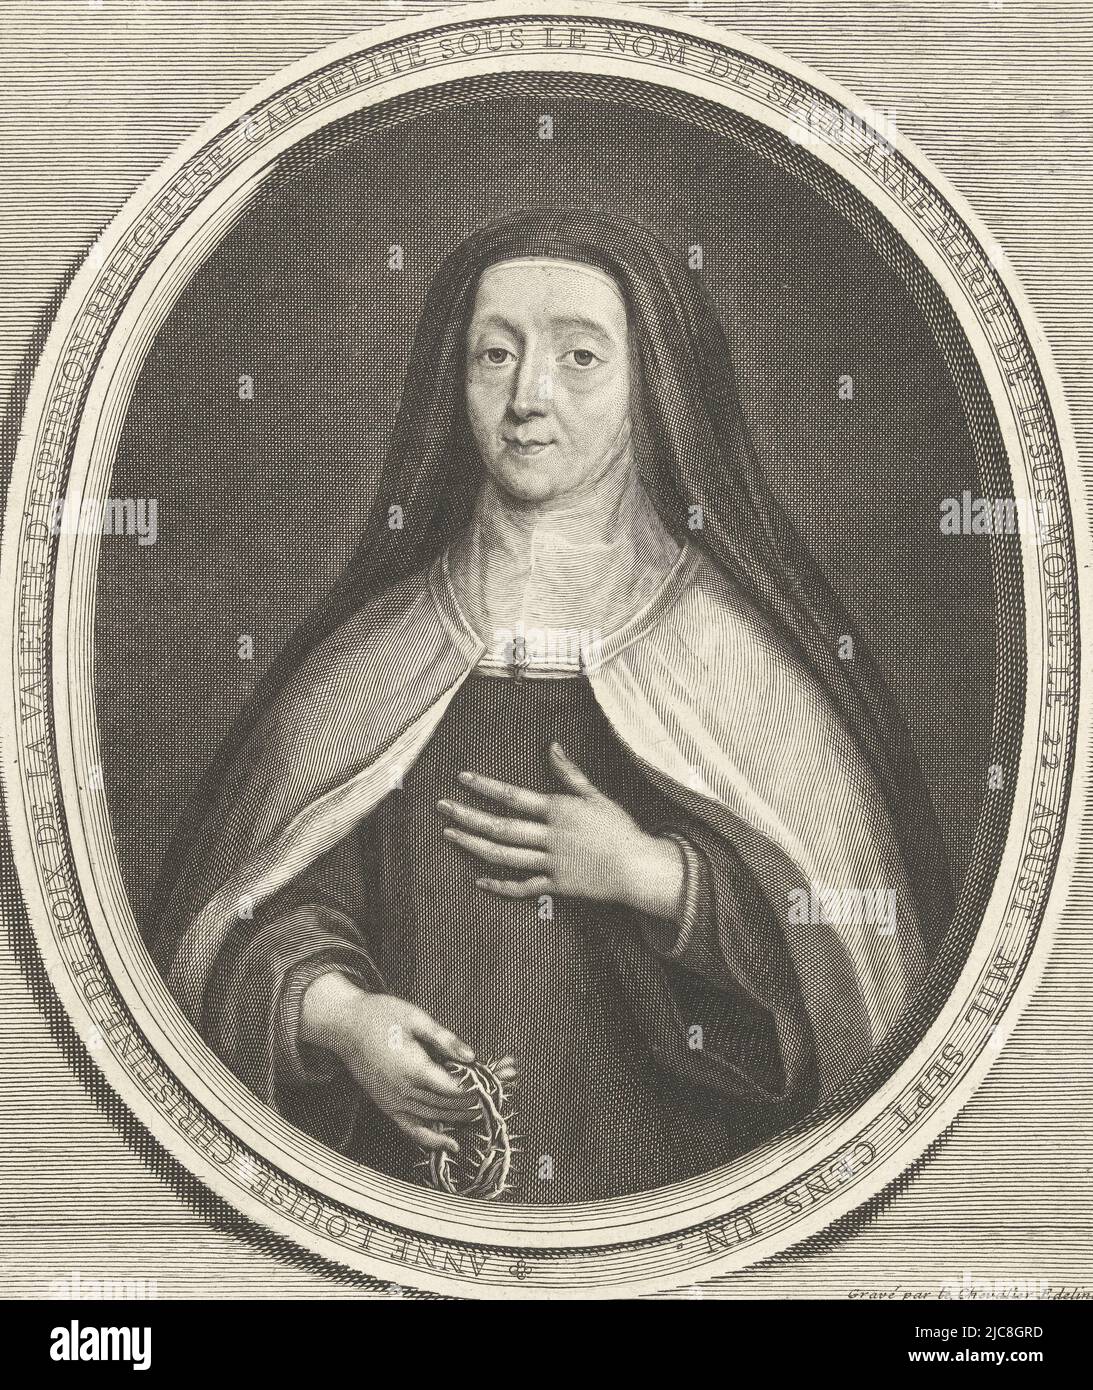 Portrait in half of Carmelite sister Anne-Louise-Christine de Foix de la Valette d'Epernon (1622-1701). Depicted with wreath of thorns in right hand, in oval frame with text, including three lines of Latin. Portrait of Anne-Louise-Christine de Foix de la Valette d'Epernon, print maker: Gerard Edelinck, (mentioned on object), France, (possibly), 1652 - 1707, paper, engraving, h 226 mm × w 174 mm Stock Photo